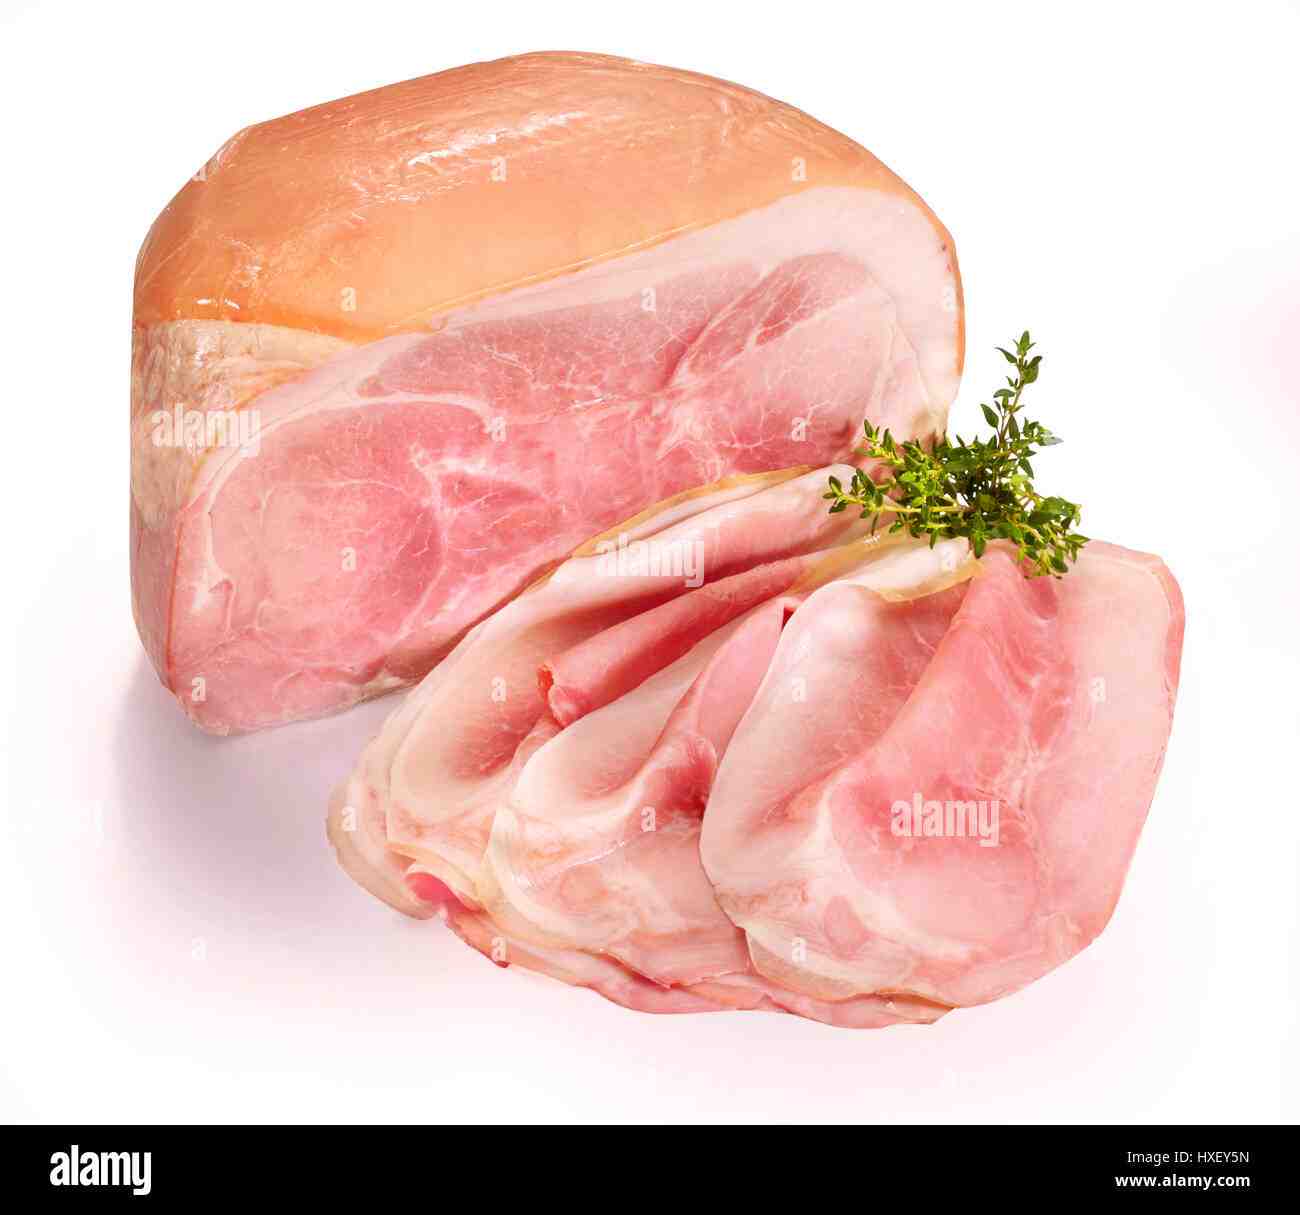 Can you eat precooked ham cold?